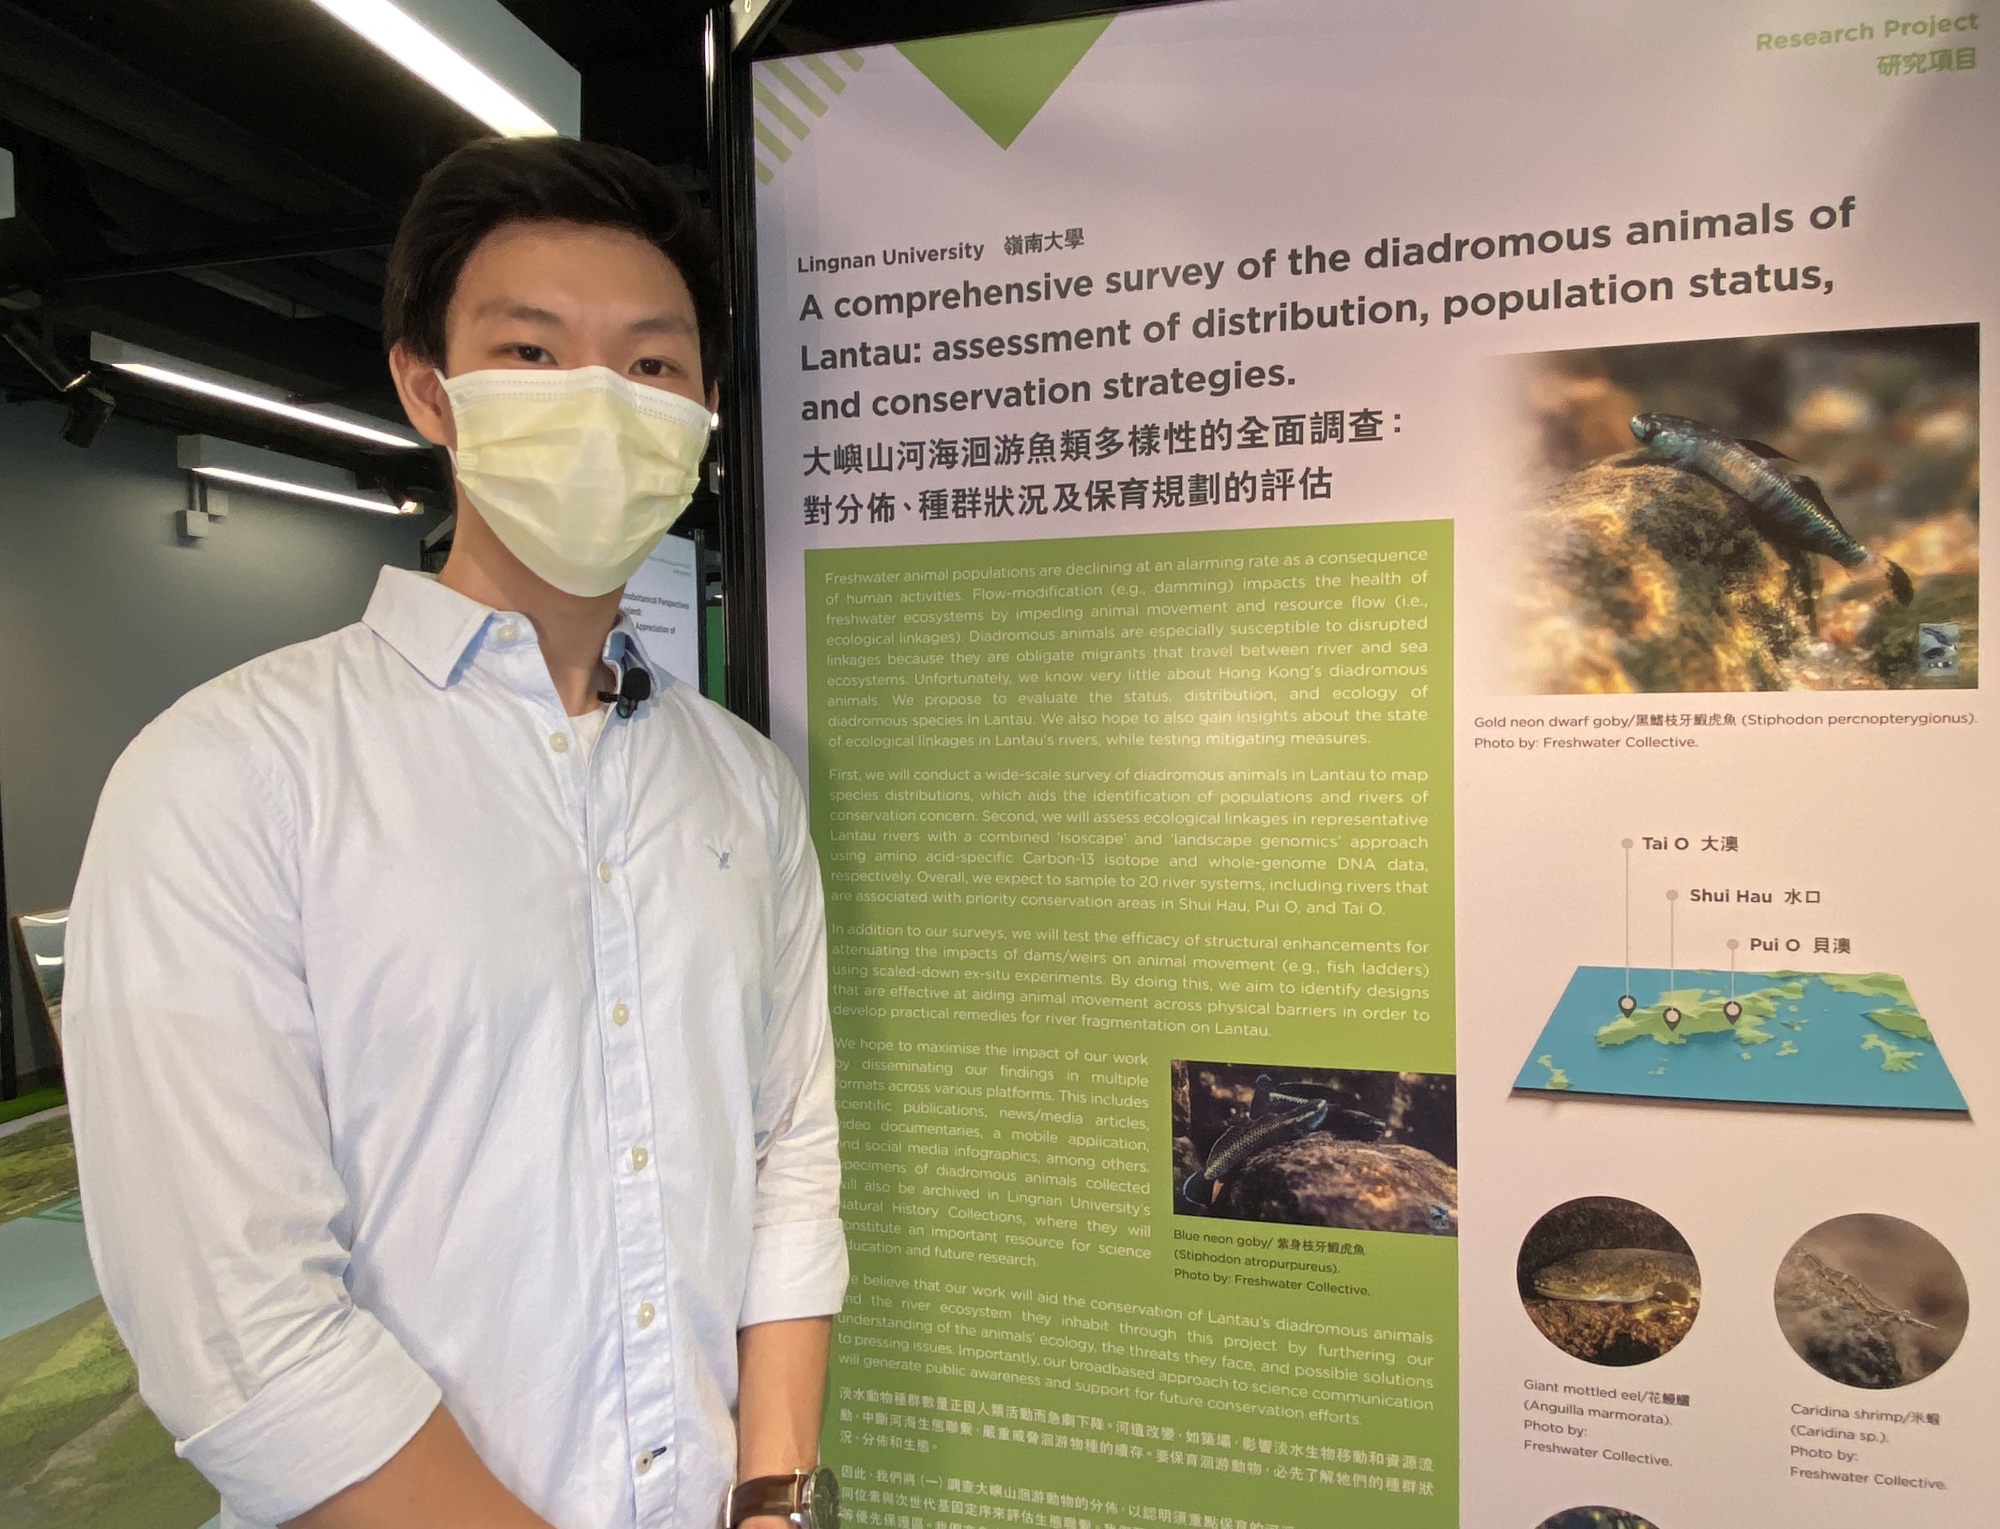 A project member of the comprehensive survey of diadromous animals of Lantau, Mr Jeffrey CHAN says that he hopes the results of the study will enable people to understand the ecology of diadromous animals and the threats these animals face. Also, he hopes the study can provide solutions for the conservation of diadromous animals and restoration of their habitats.